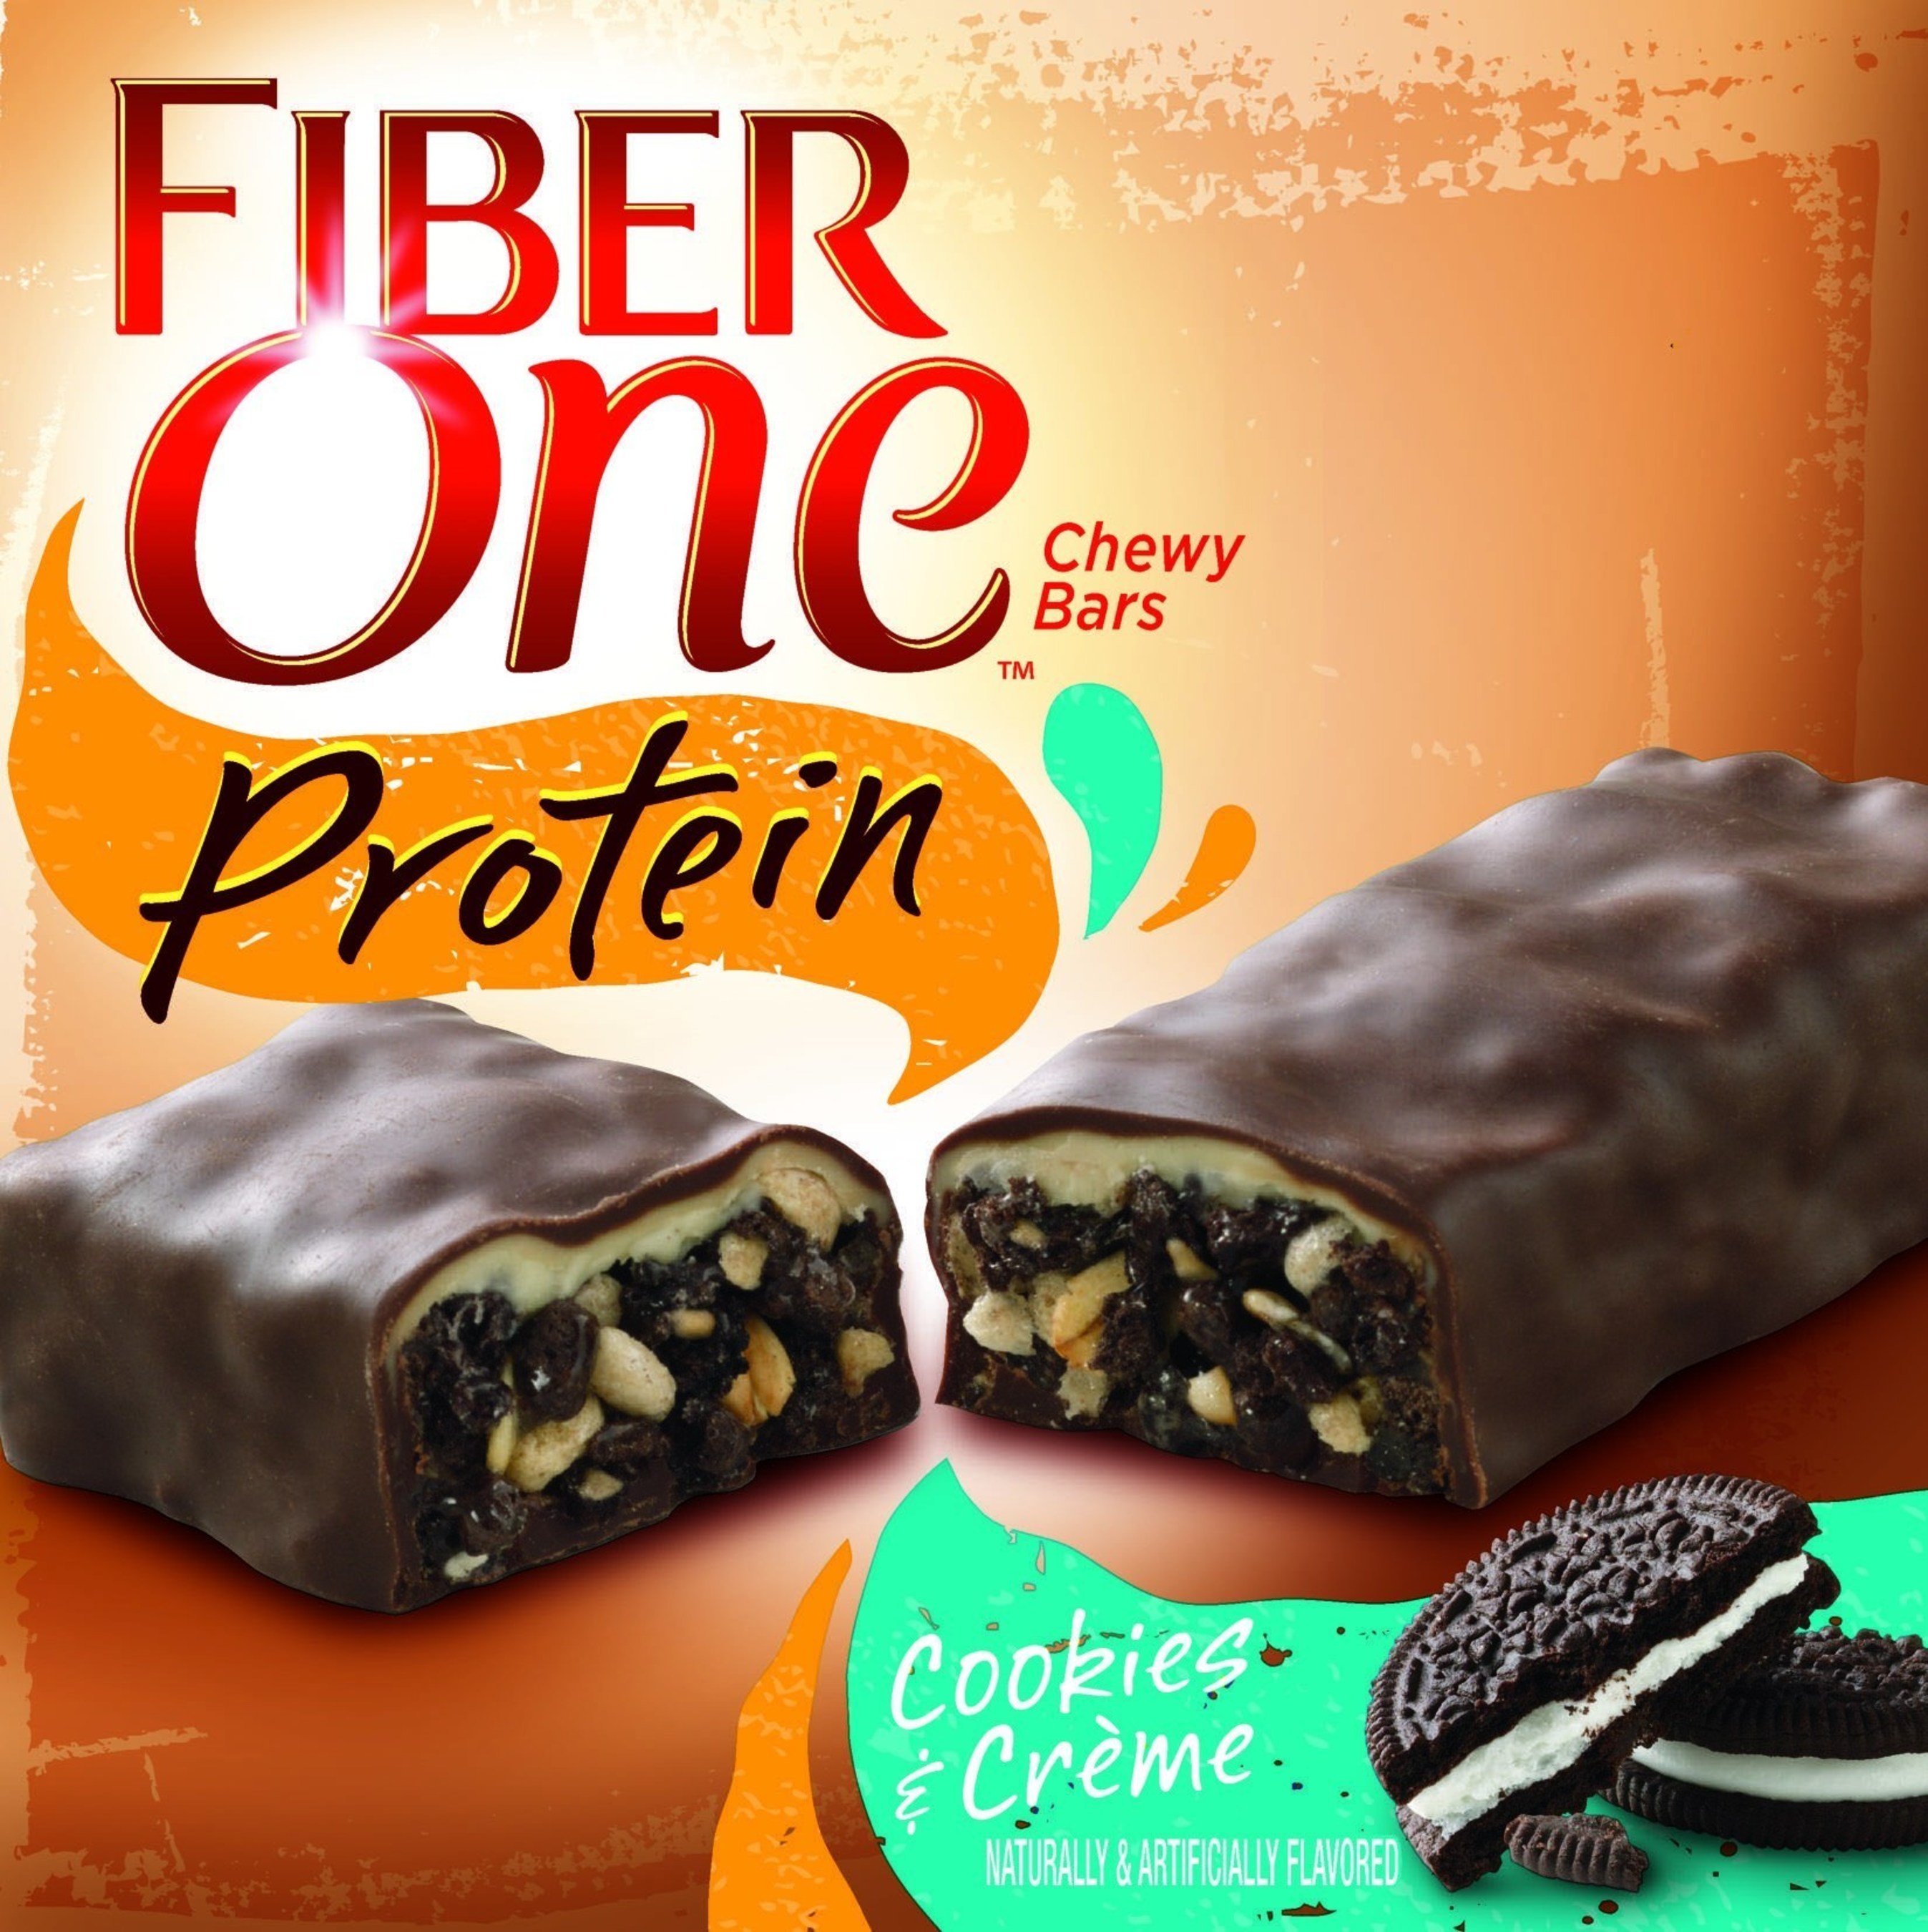 Fiber One(TM) Protein Cookies & Creme offers 6 grams of protein in an enticing combination of creamy layers and cookie pieces.